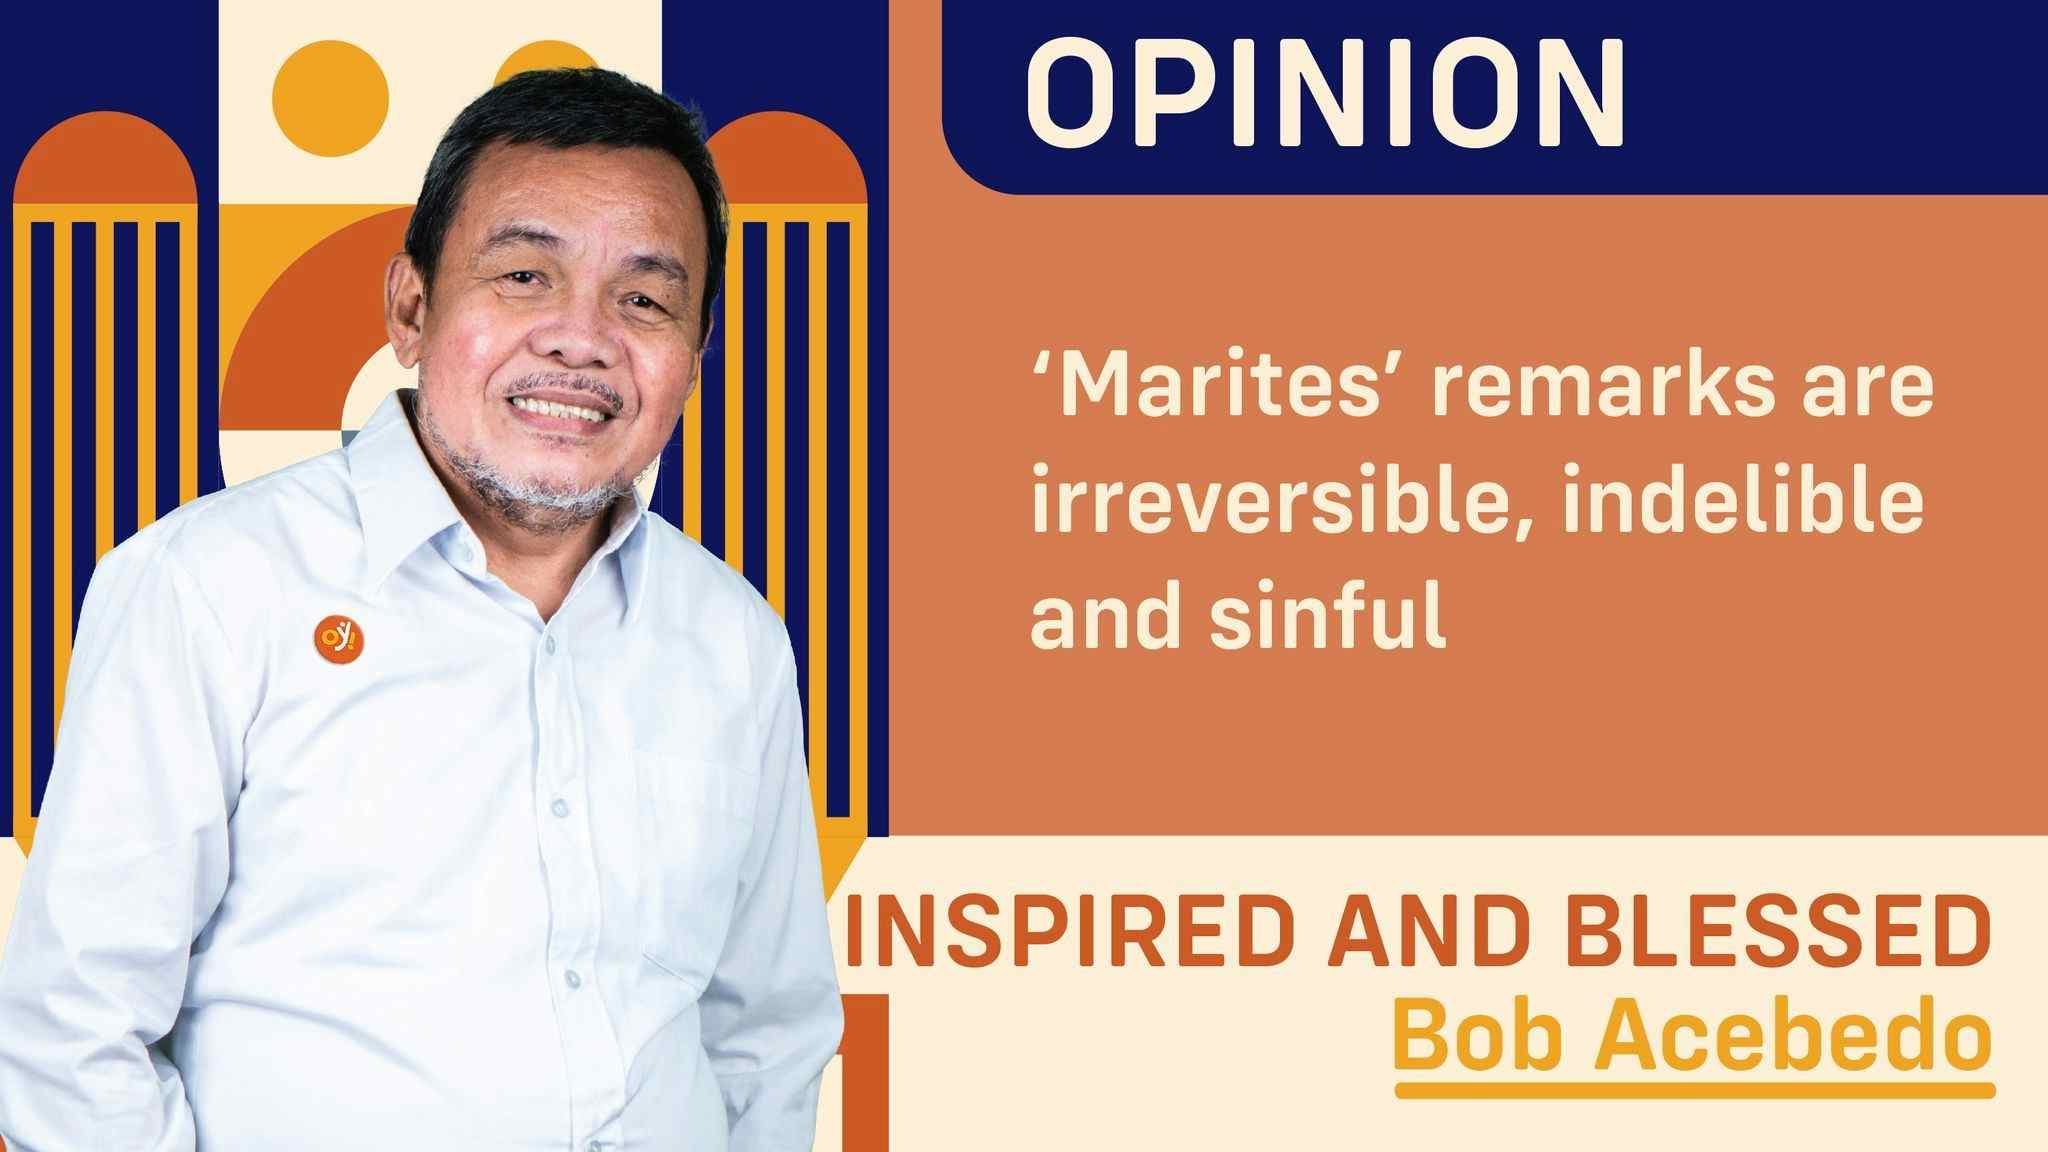 ‘Marites’ remarks are irreversible, indelible and sinful